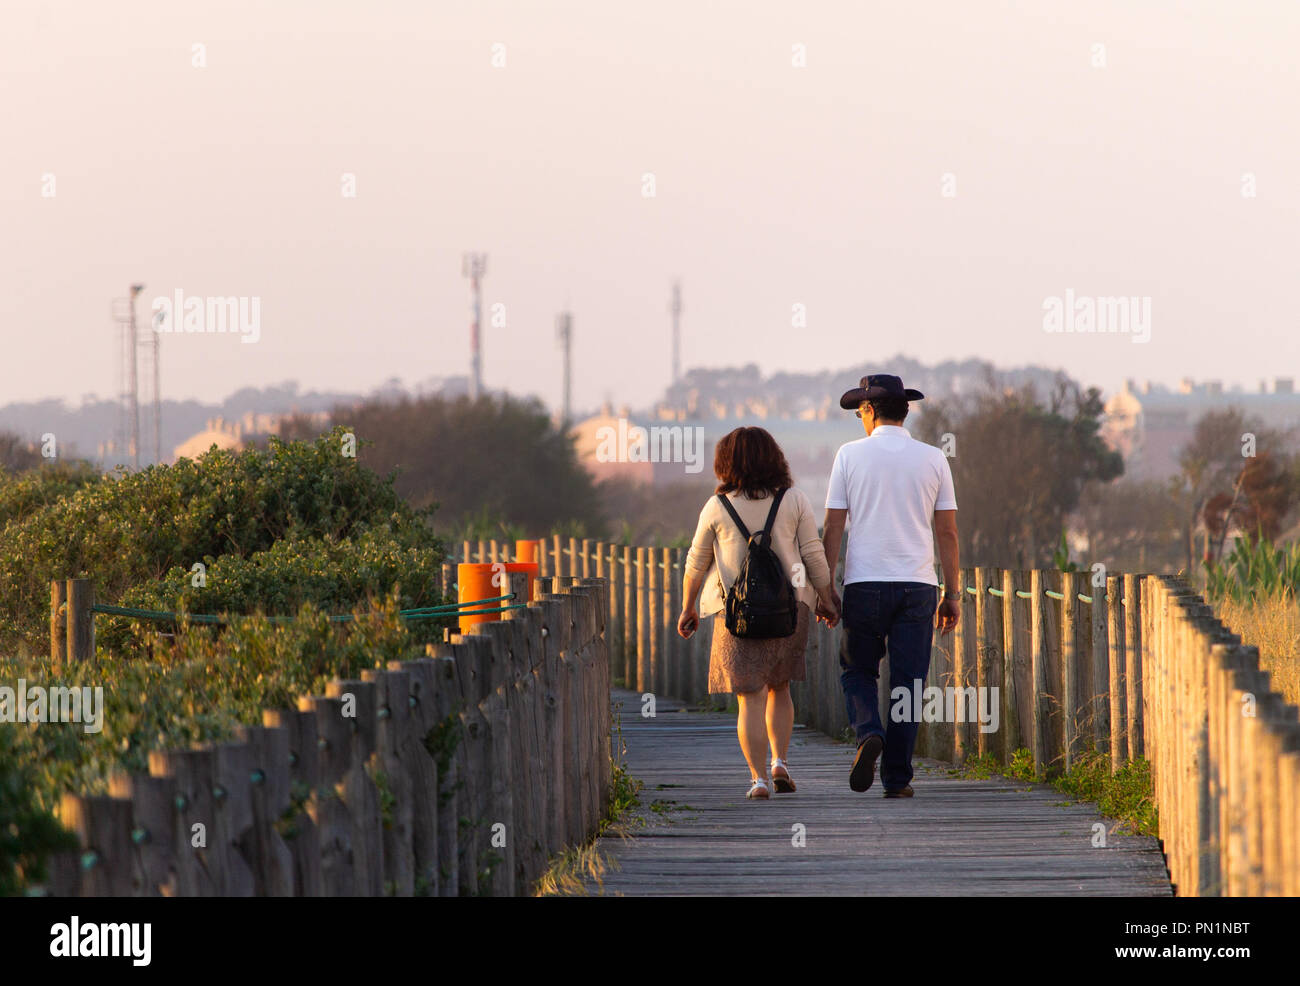 A middle-aged couple walks along a pathway. Stock Photo